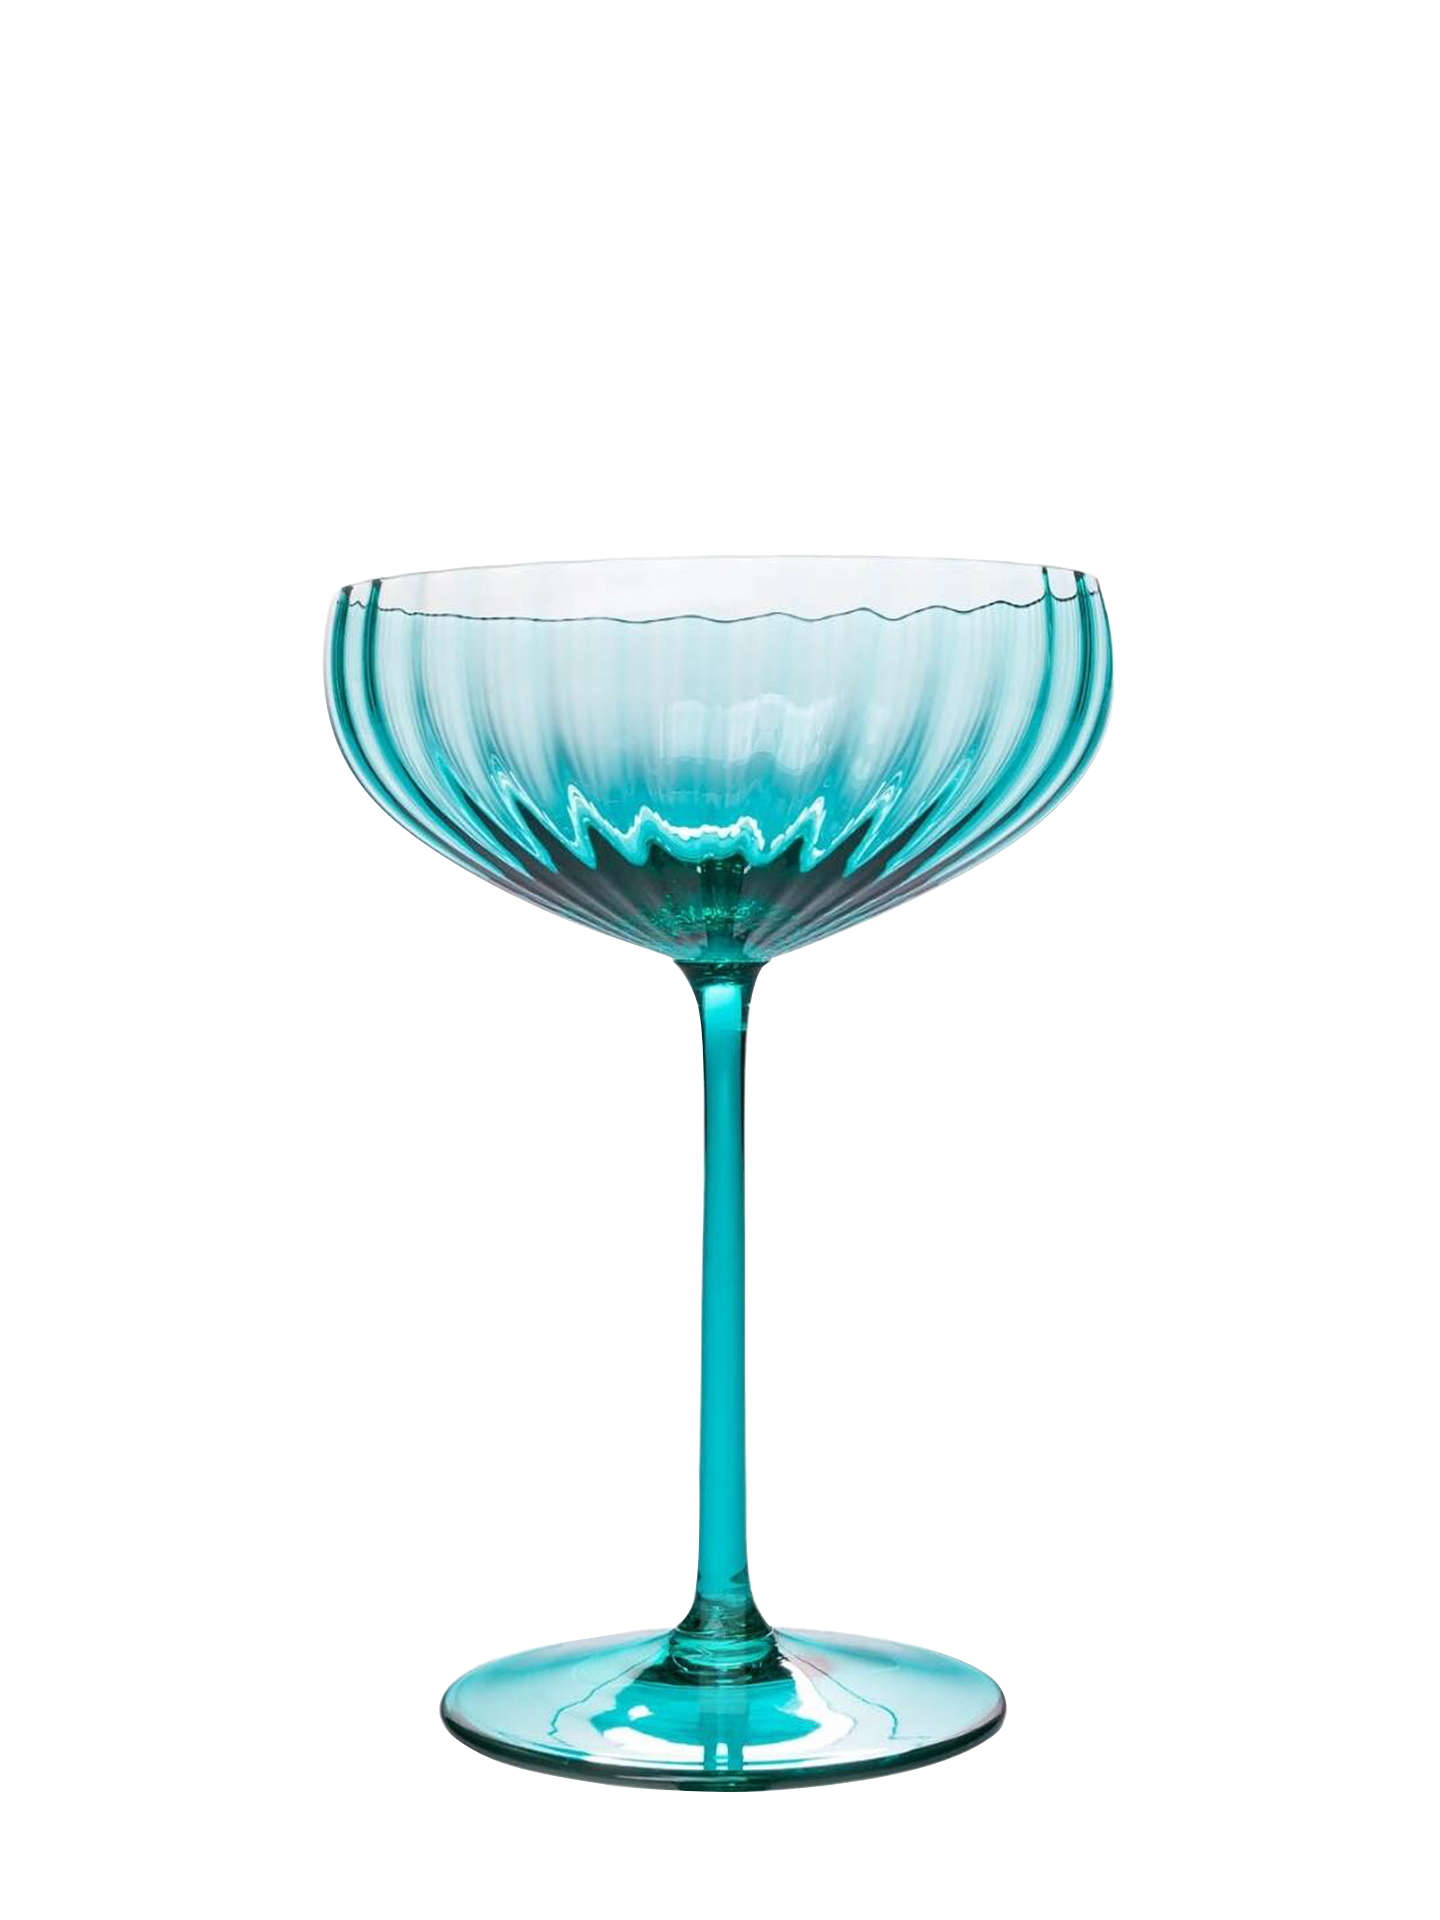 Lyon Champagne Saucer, Turquoise